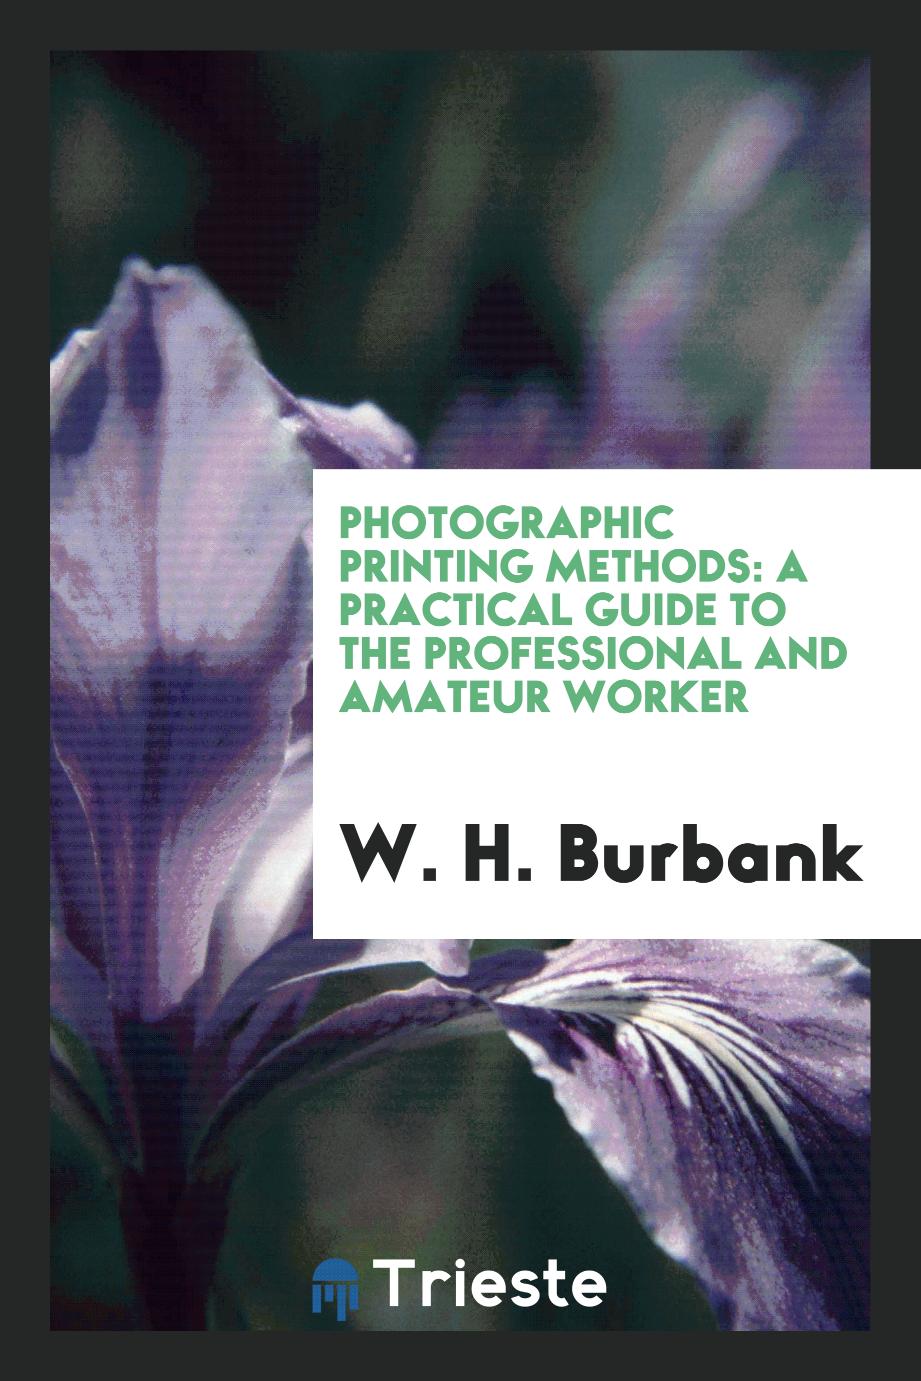 Photographic printing methods: a practical guide to the professional and amateur worker